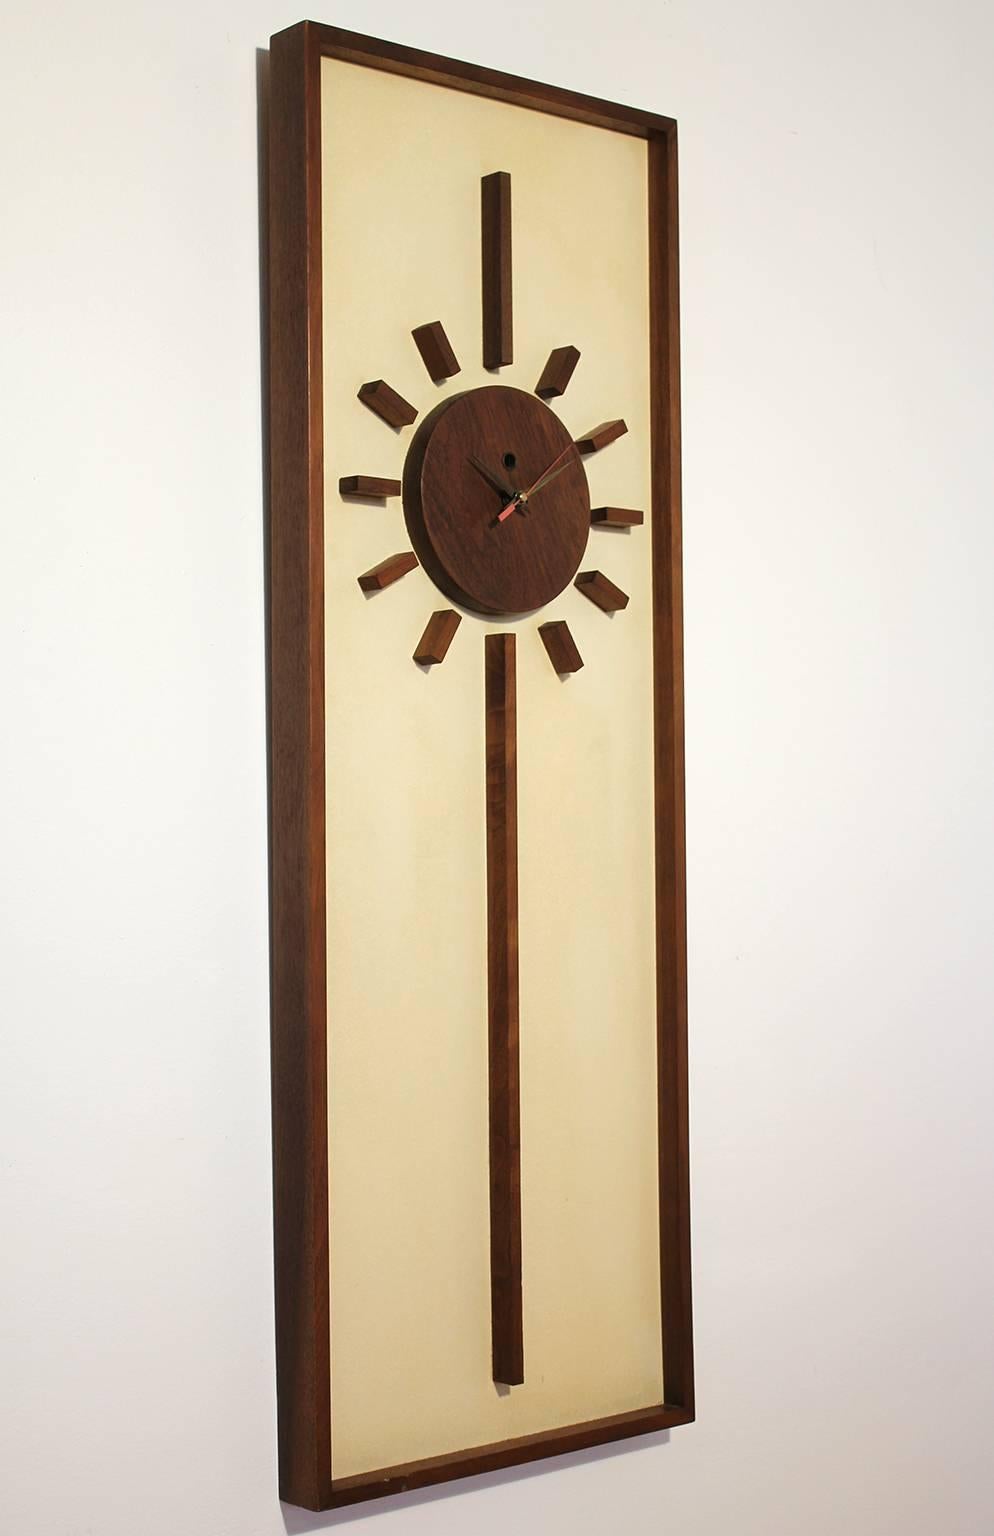 1960s modernist California Design walnut wall clock from Peter Pepper Products. Originally a wind up clock, this has been updated with battery operated quartz movement. Works perfectly and keeps time.